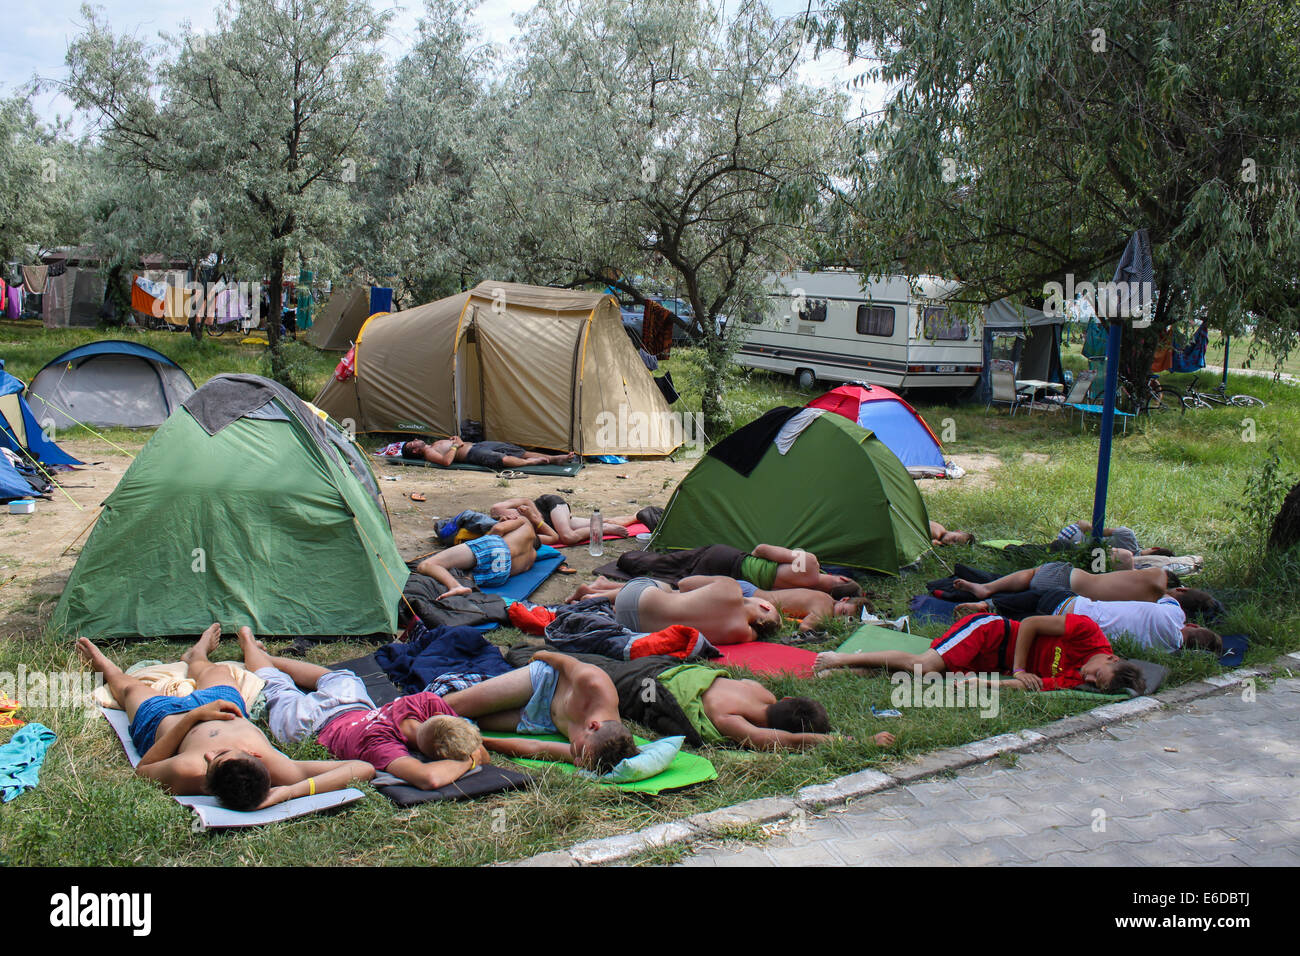 Mamaia, Romania - July 24,2014: Boys in a camping sleeping in the middle of the day, probably drugged Stock Photo